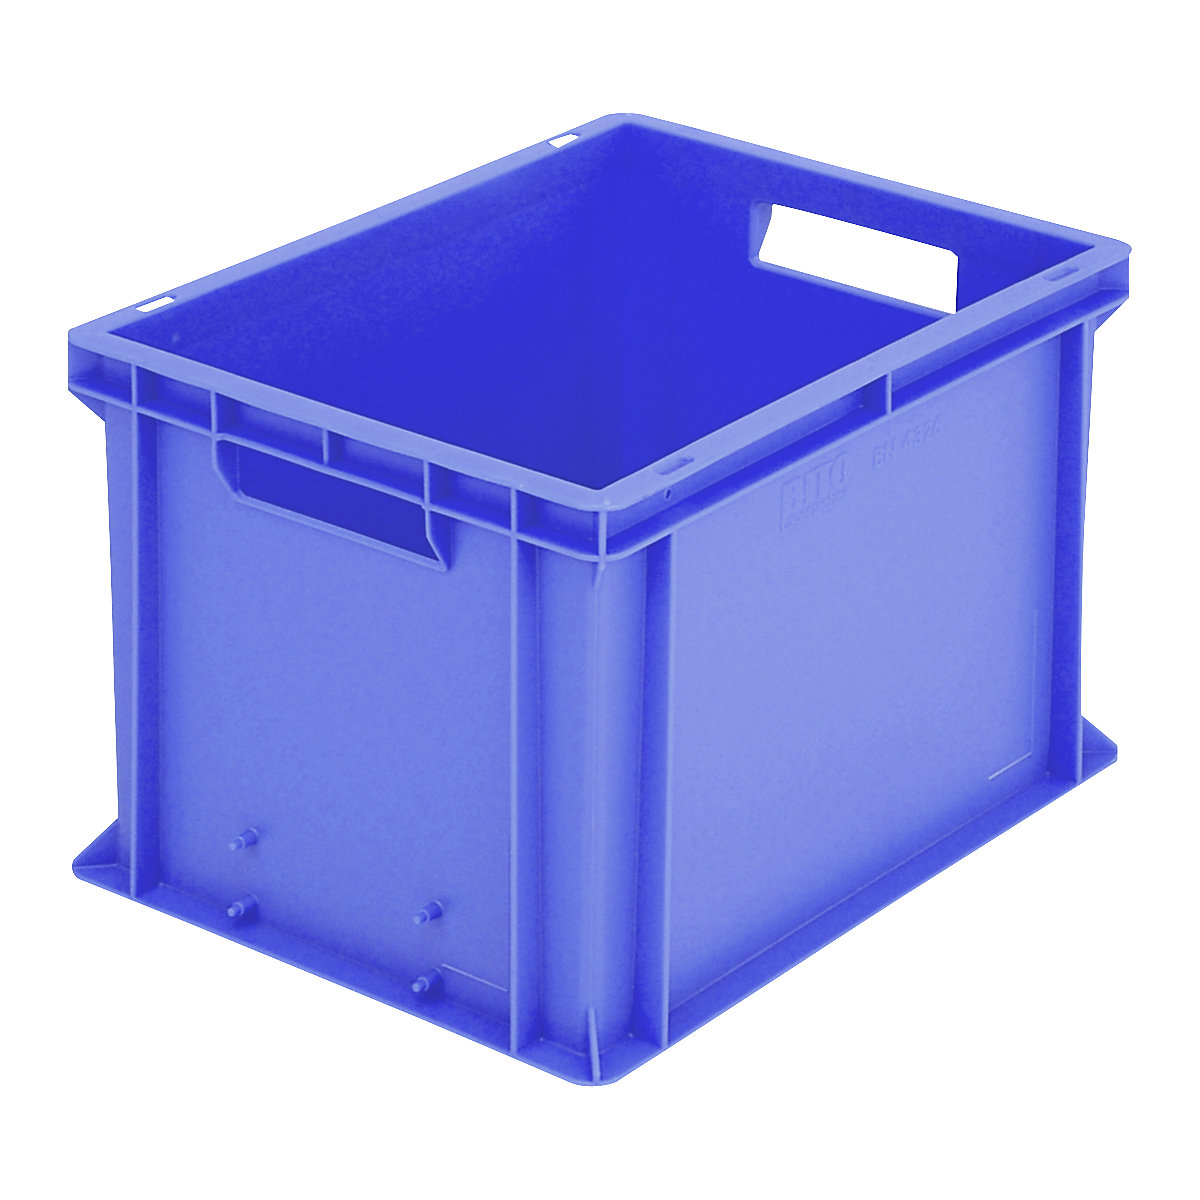 BN Euro stacking container – BITO, solid walls and base, LxWxH 400 x 300 x 265 mm-5